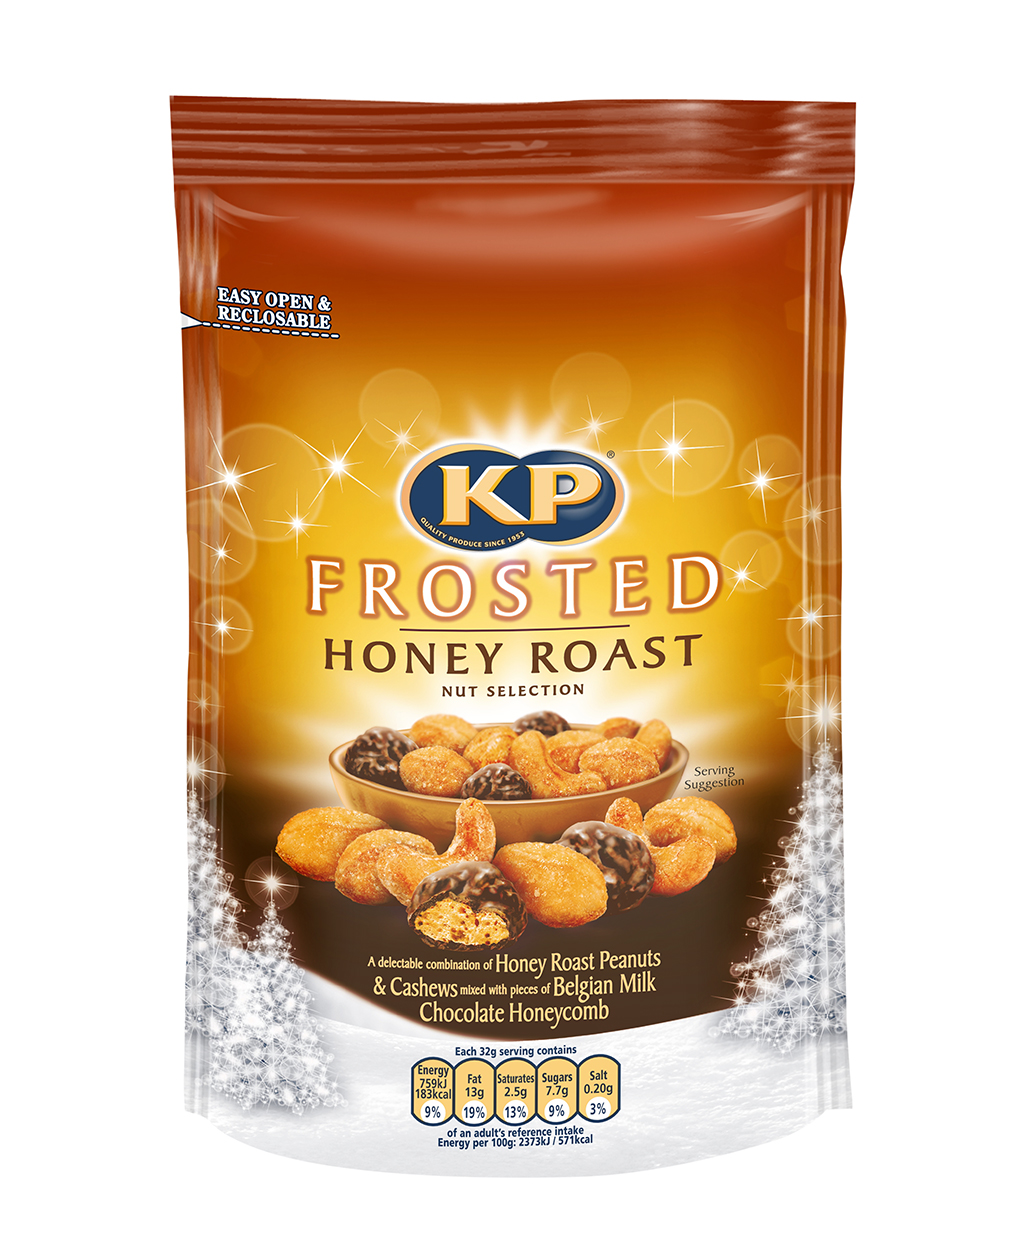 366262_23865_KP_Frosted-Honey-Roast-Nut-Mix_225g